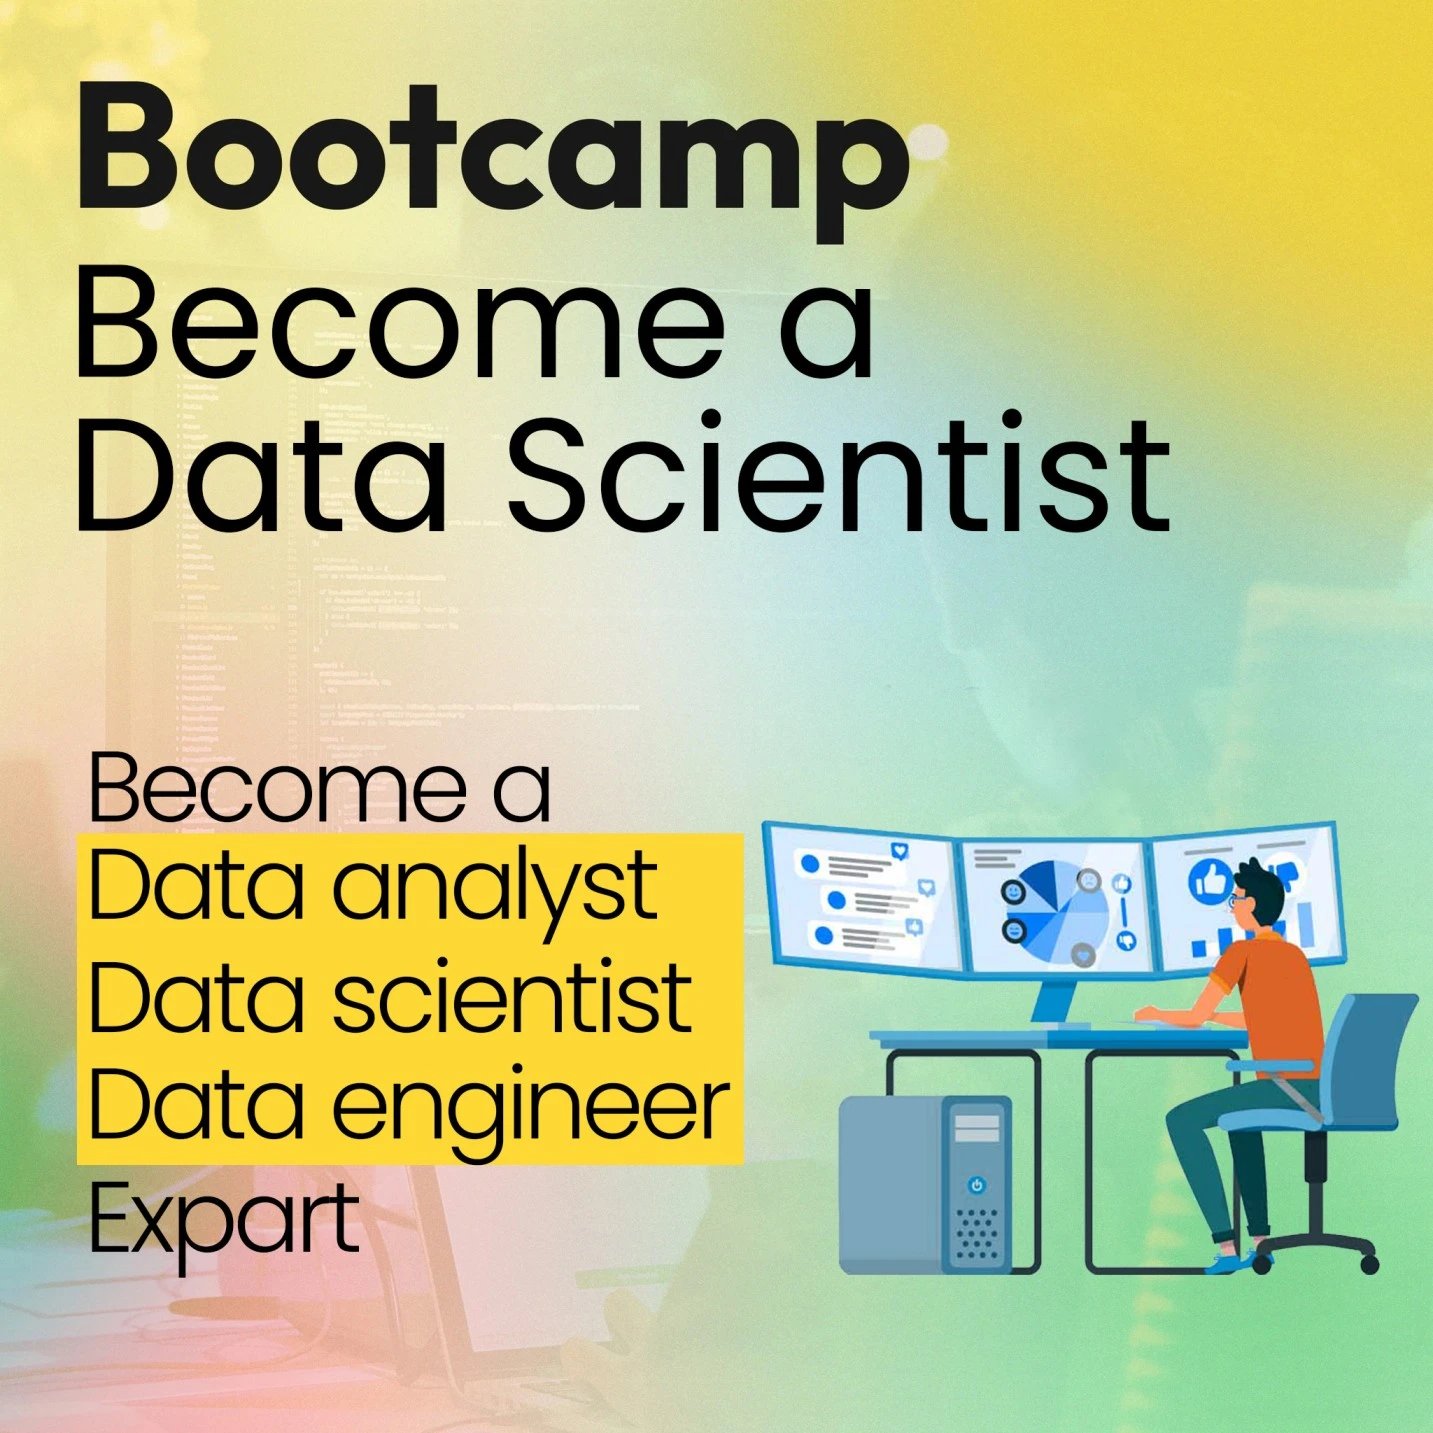 Bootcamp: Become A Data Scientist